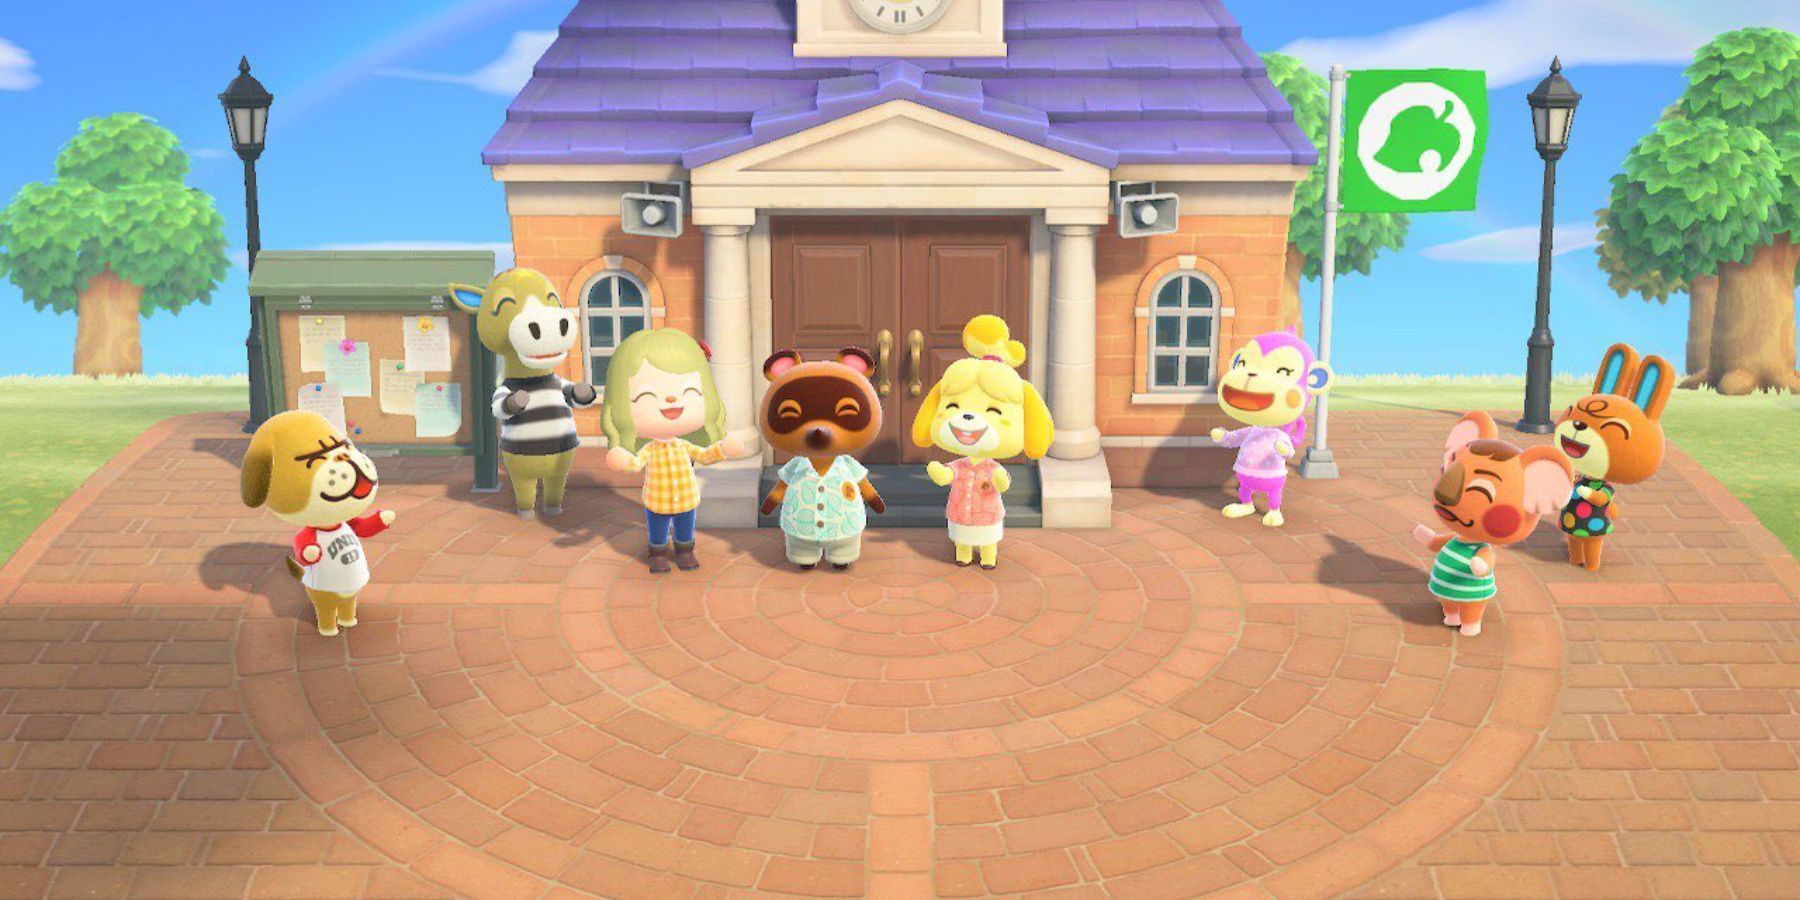 Tom Nook, the player, and other villagers in the town square